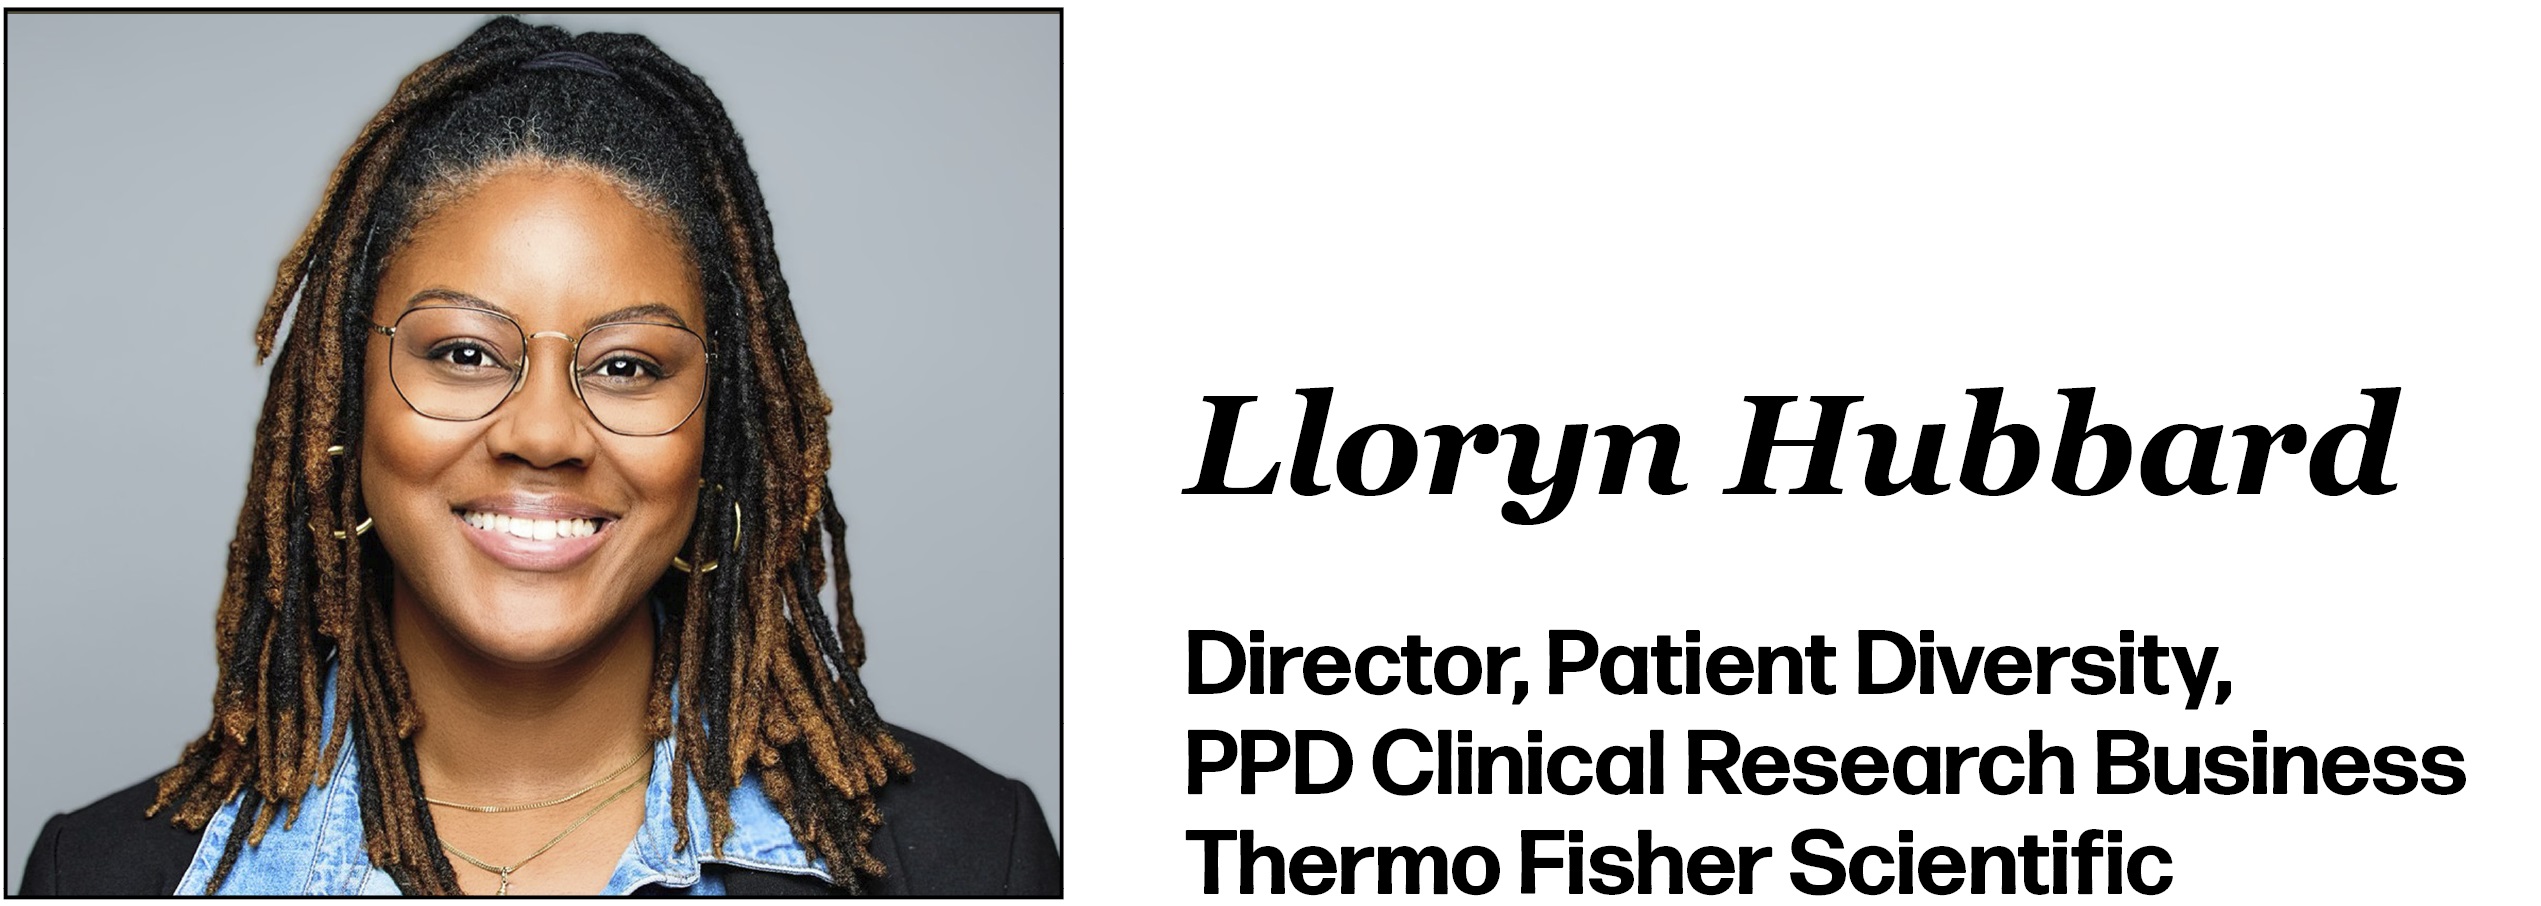 Lloryn Hubbard Director, Patient Diversity, PPD Clinical Research Business Thermo Fisher Scientific